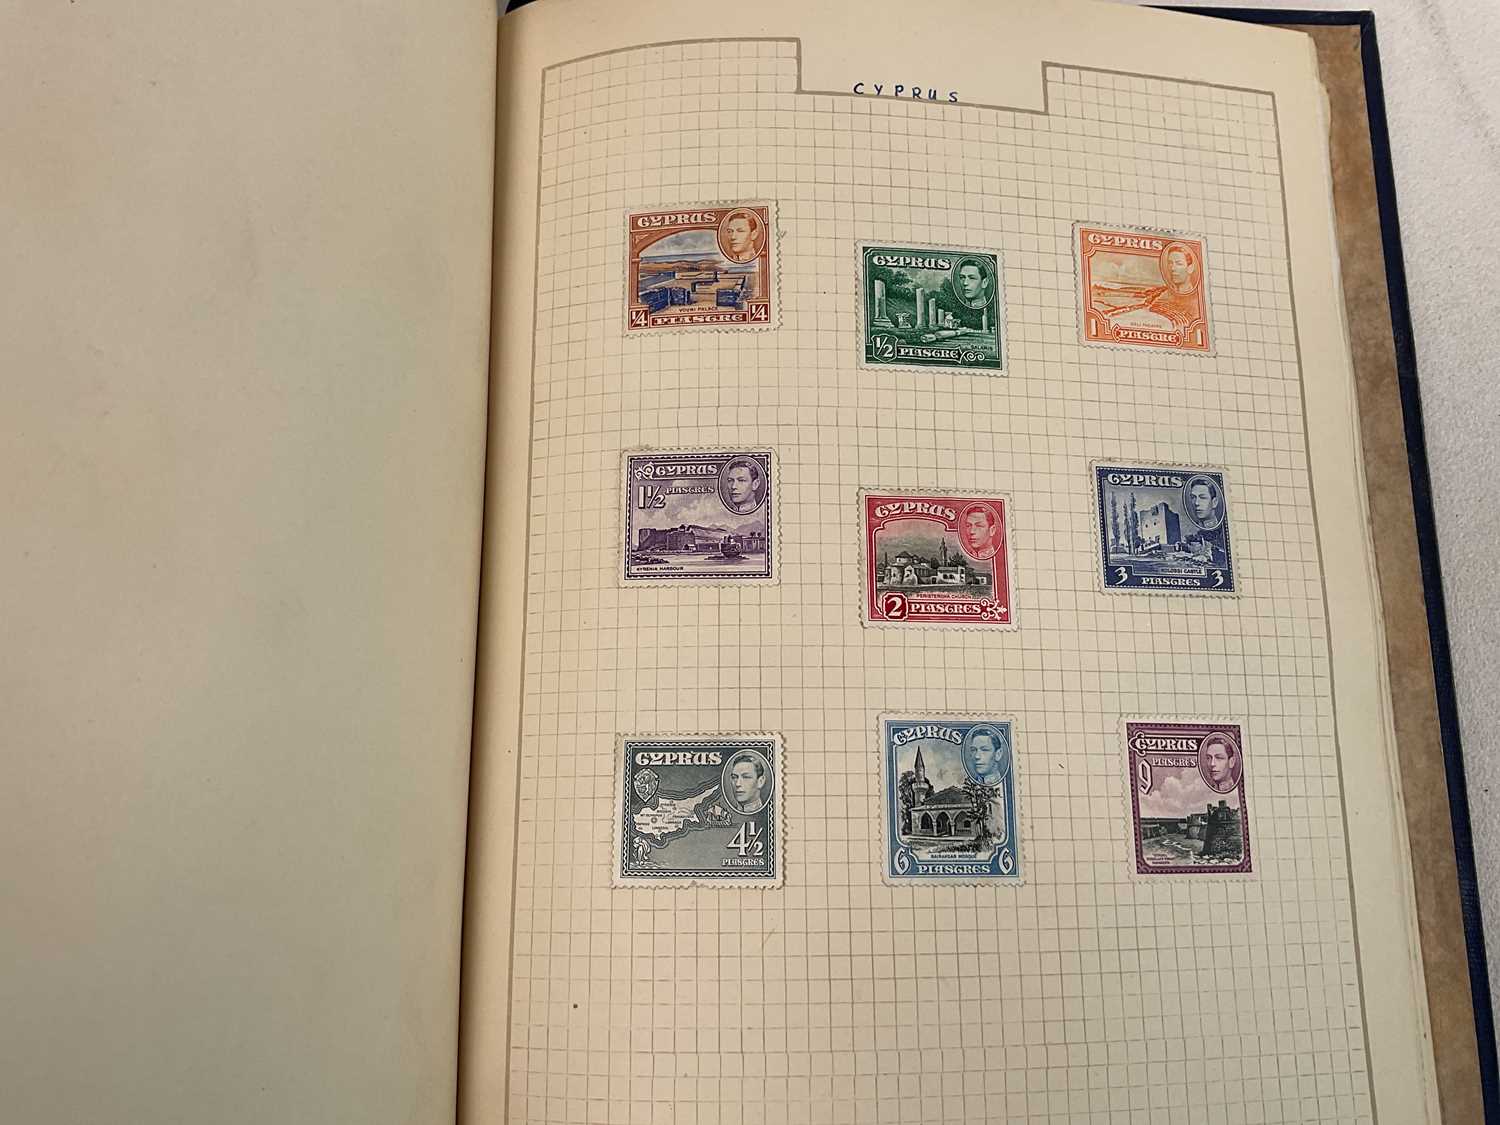 A stamp album sparsely filled including British Isles, Caribbean, Canada, Falkland Islands, etc.